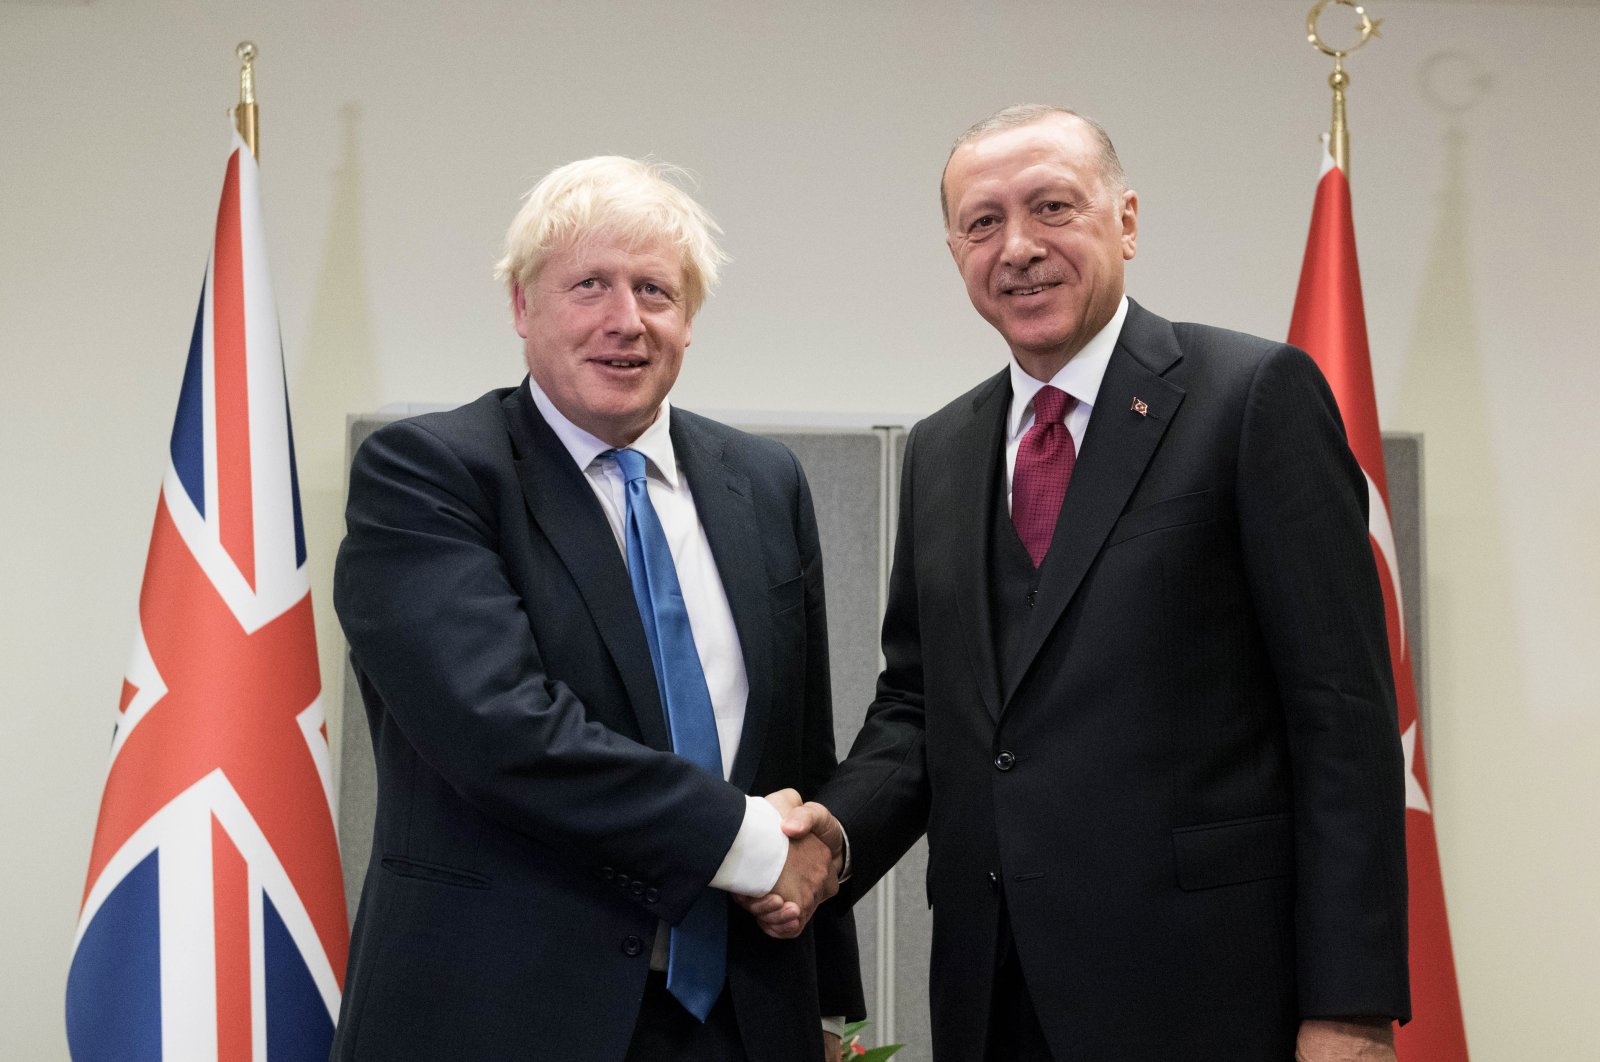 President Recep Tayyip Erdoğan meets Prime Minister Boris Johnson (L) at the 74th Session of the U.N. General Assembly, at the United Nations Headquarters in New York, U.S., Sept. 24, 2019. (Reuters File Photo)